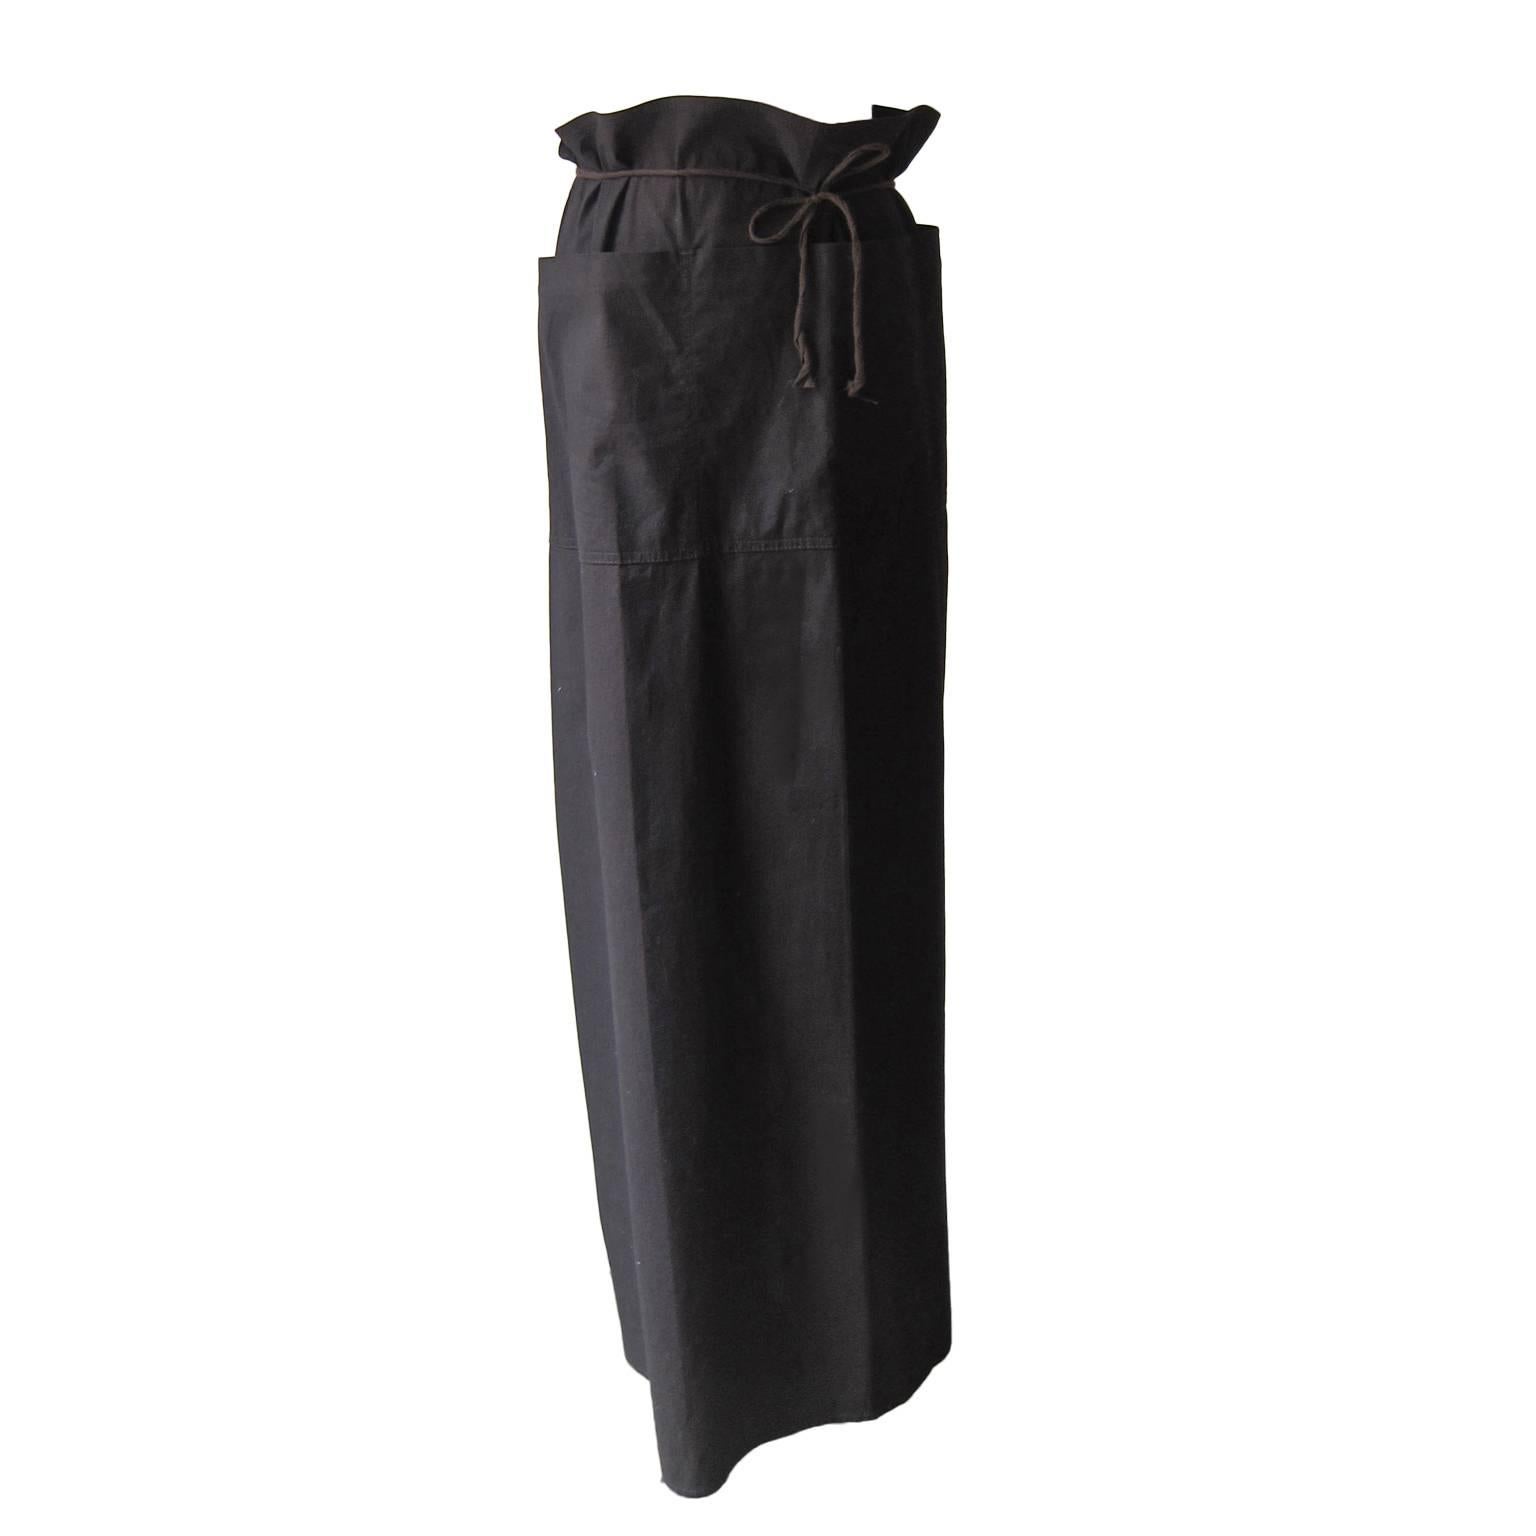 Martin Margiela long wrap skirt with pockets from collection 1998 in very dark brown. It crosses with strings in the back and tie on the front. 
Size 40 Italian

Measurements: 
Width: 100 cm: 
length 104 cm

